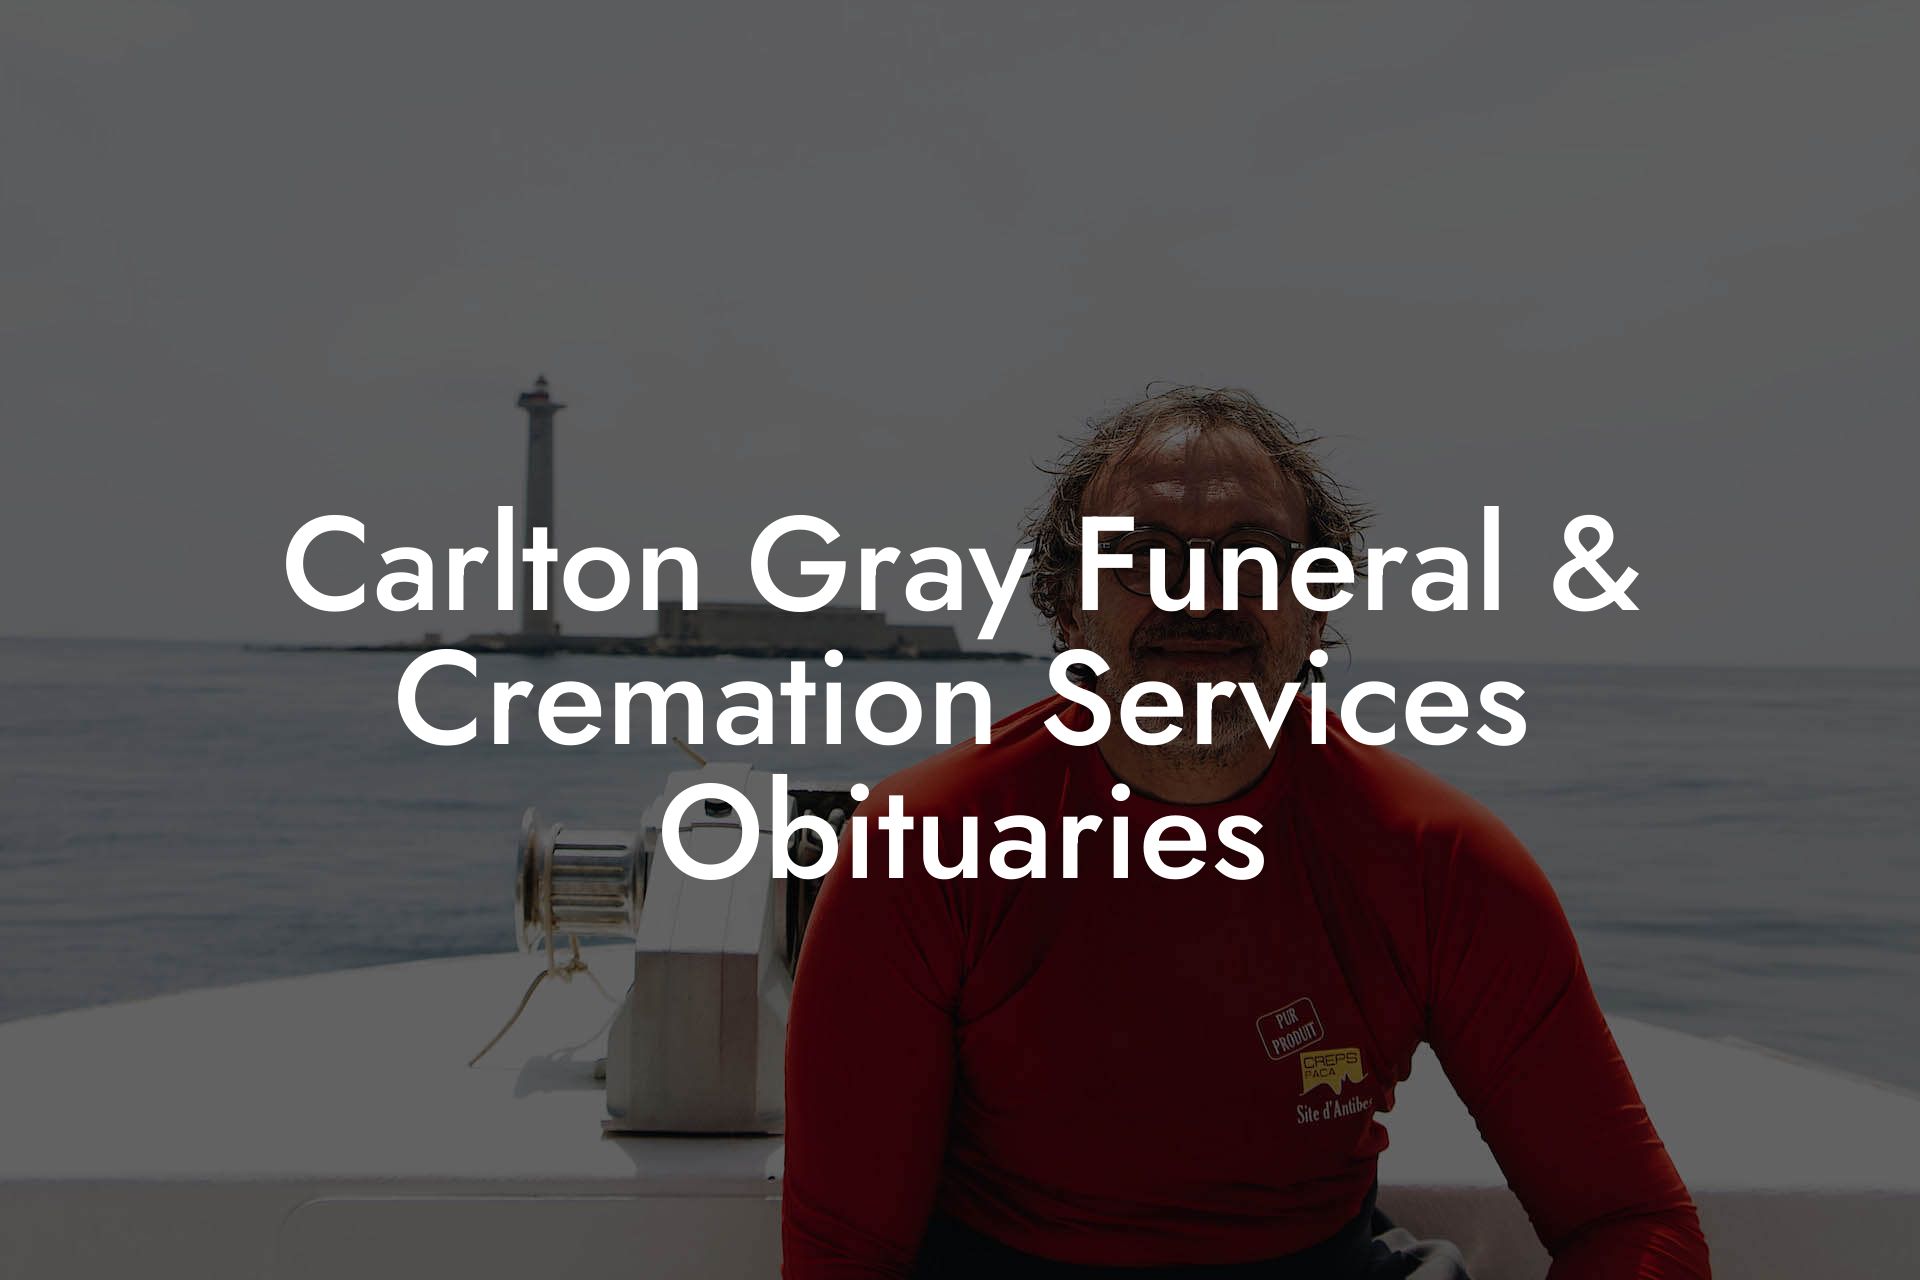 Carlton Gray Funeral & Cremation Services Obituaries - Eulogy Assistant